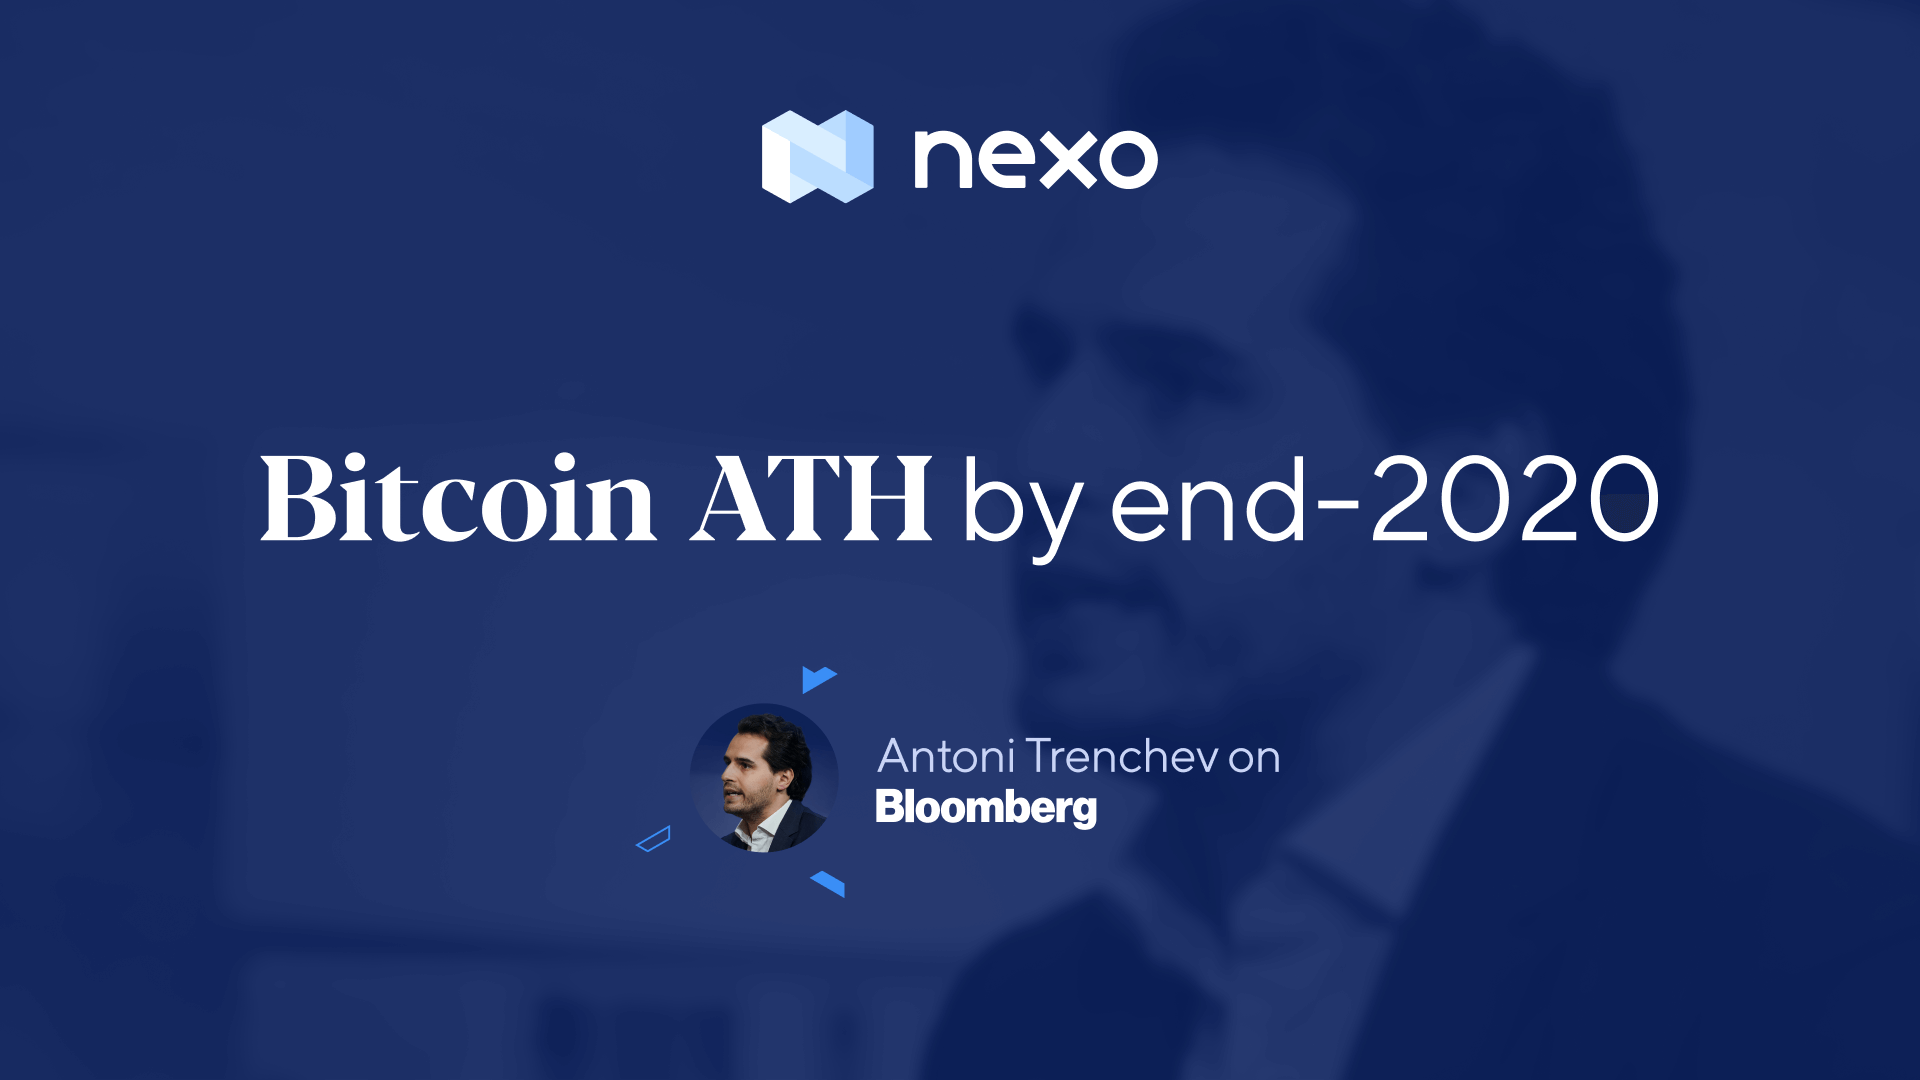 “It’s been a Bitcoin decade,” Antoni Trenchev on Bloomberg